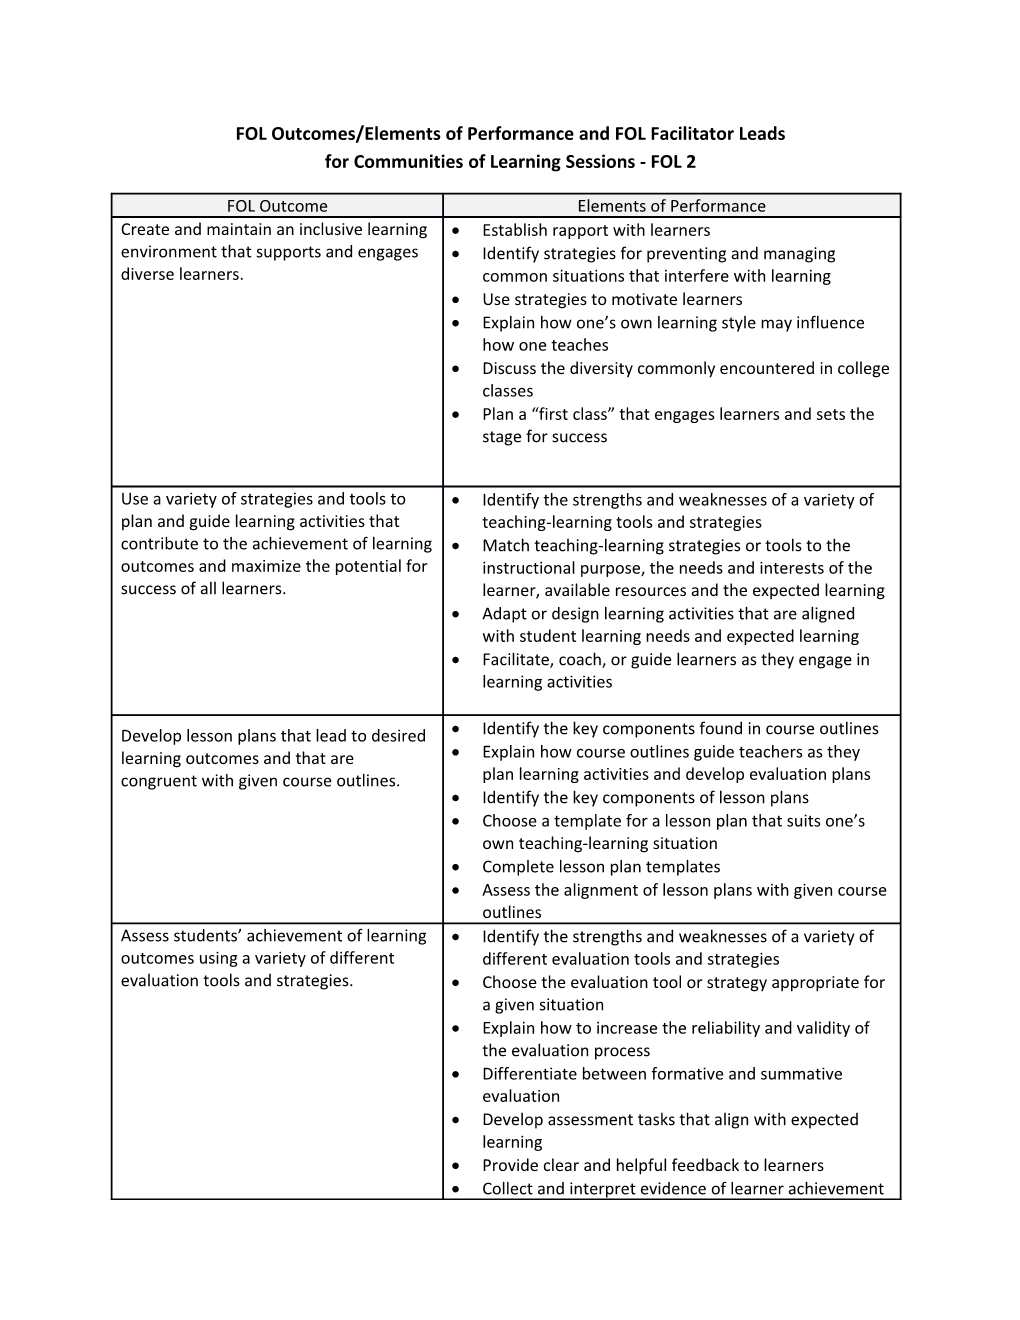 FOL Outcomes/Elements of Performance and FOL Facilitator Leads for Communities of Learning